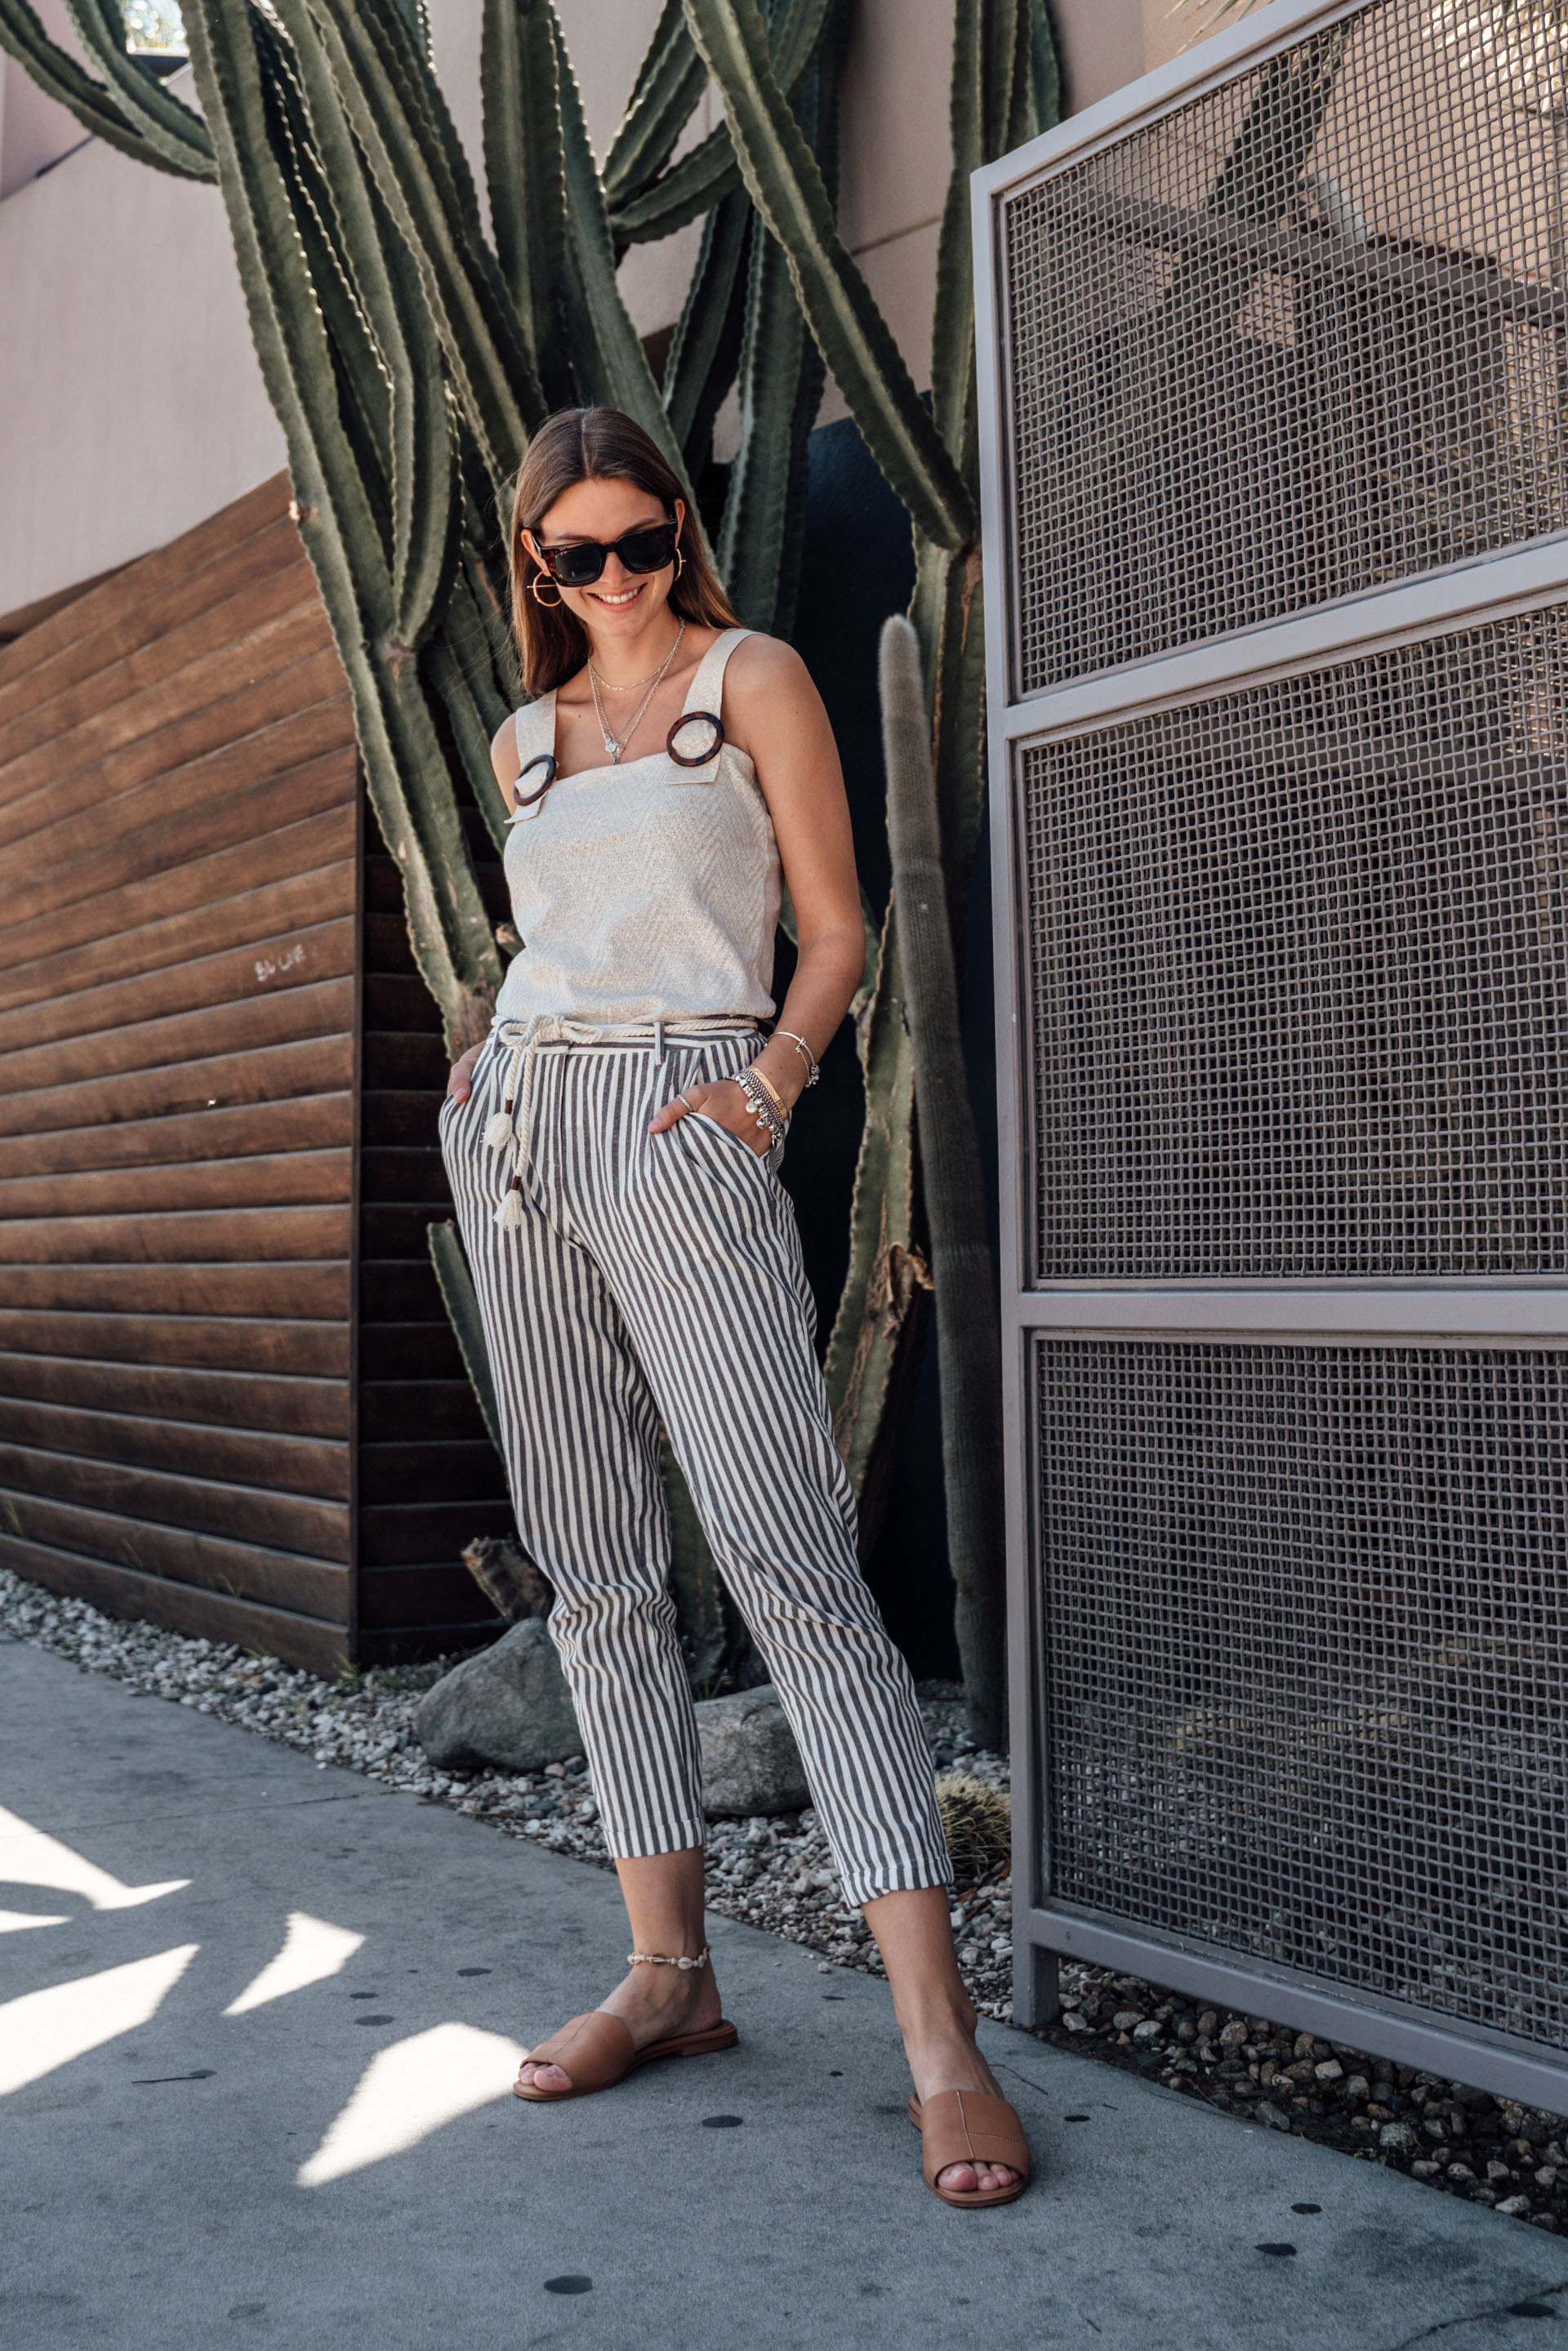 How to style: wearing striped pants this season